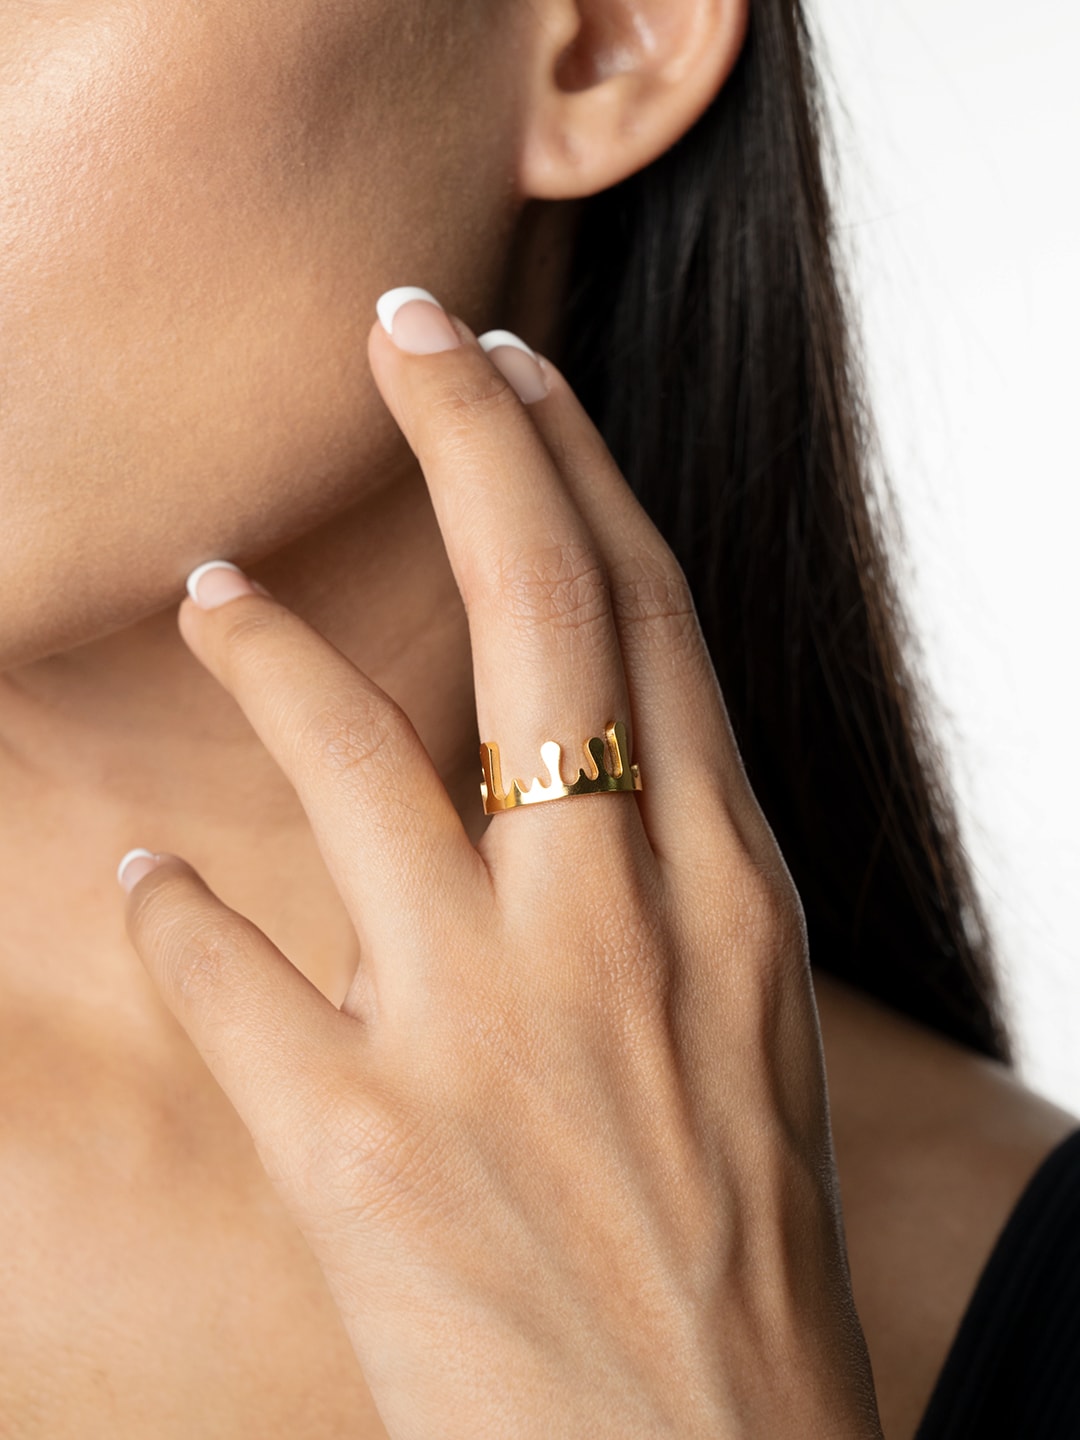 WHITE LIES 18k Gold-Plated Gold-Toned Adjustable Finger Ring Price in India